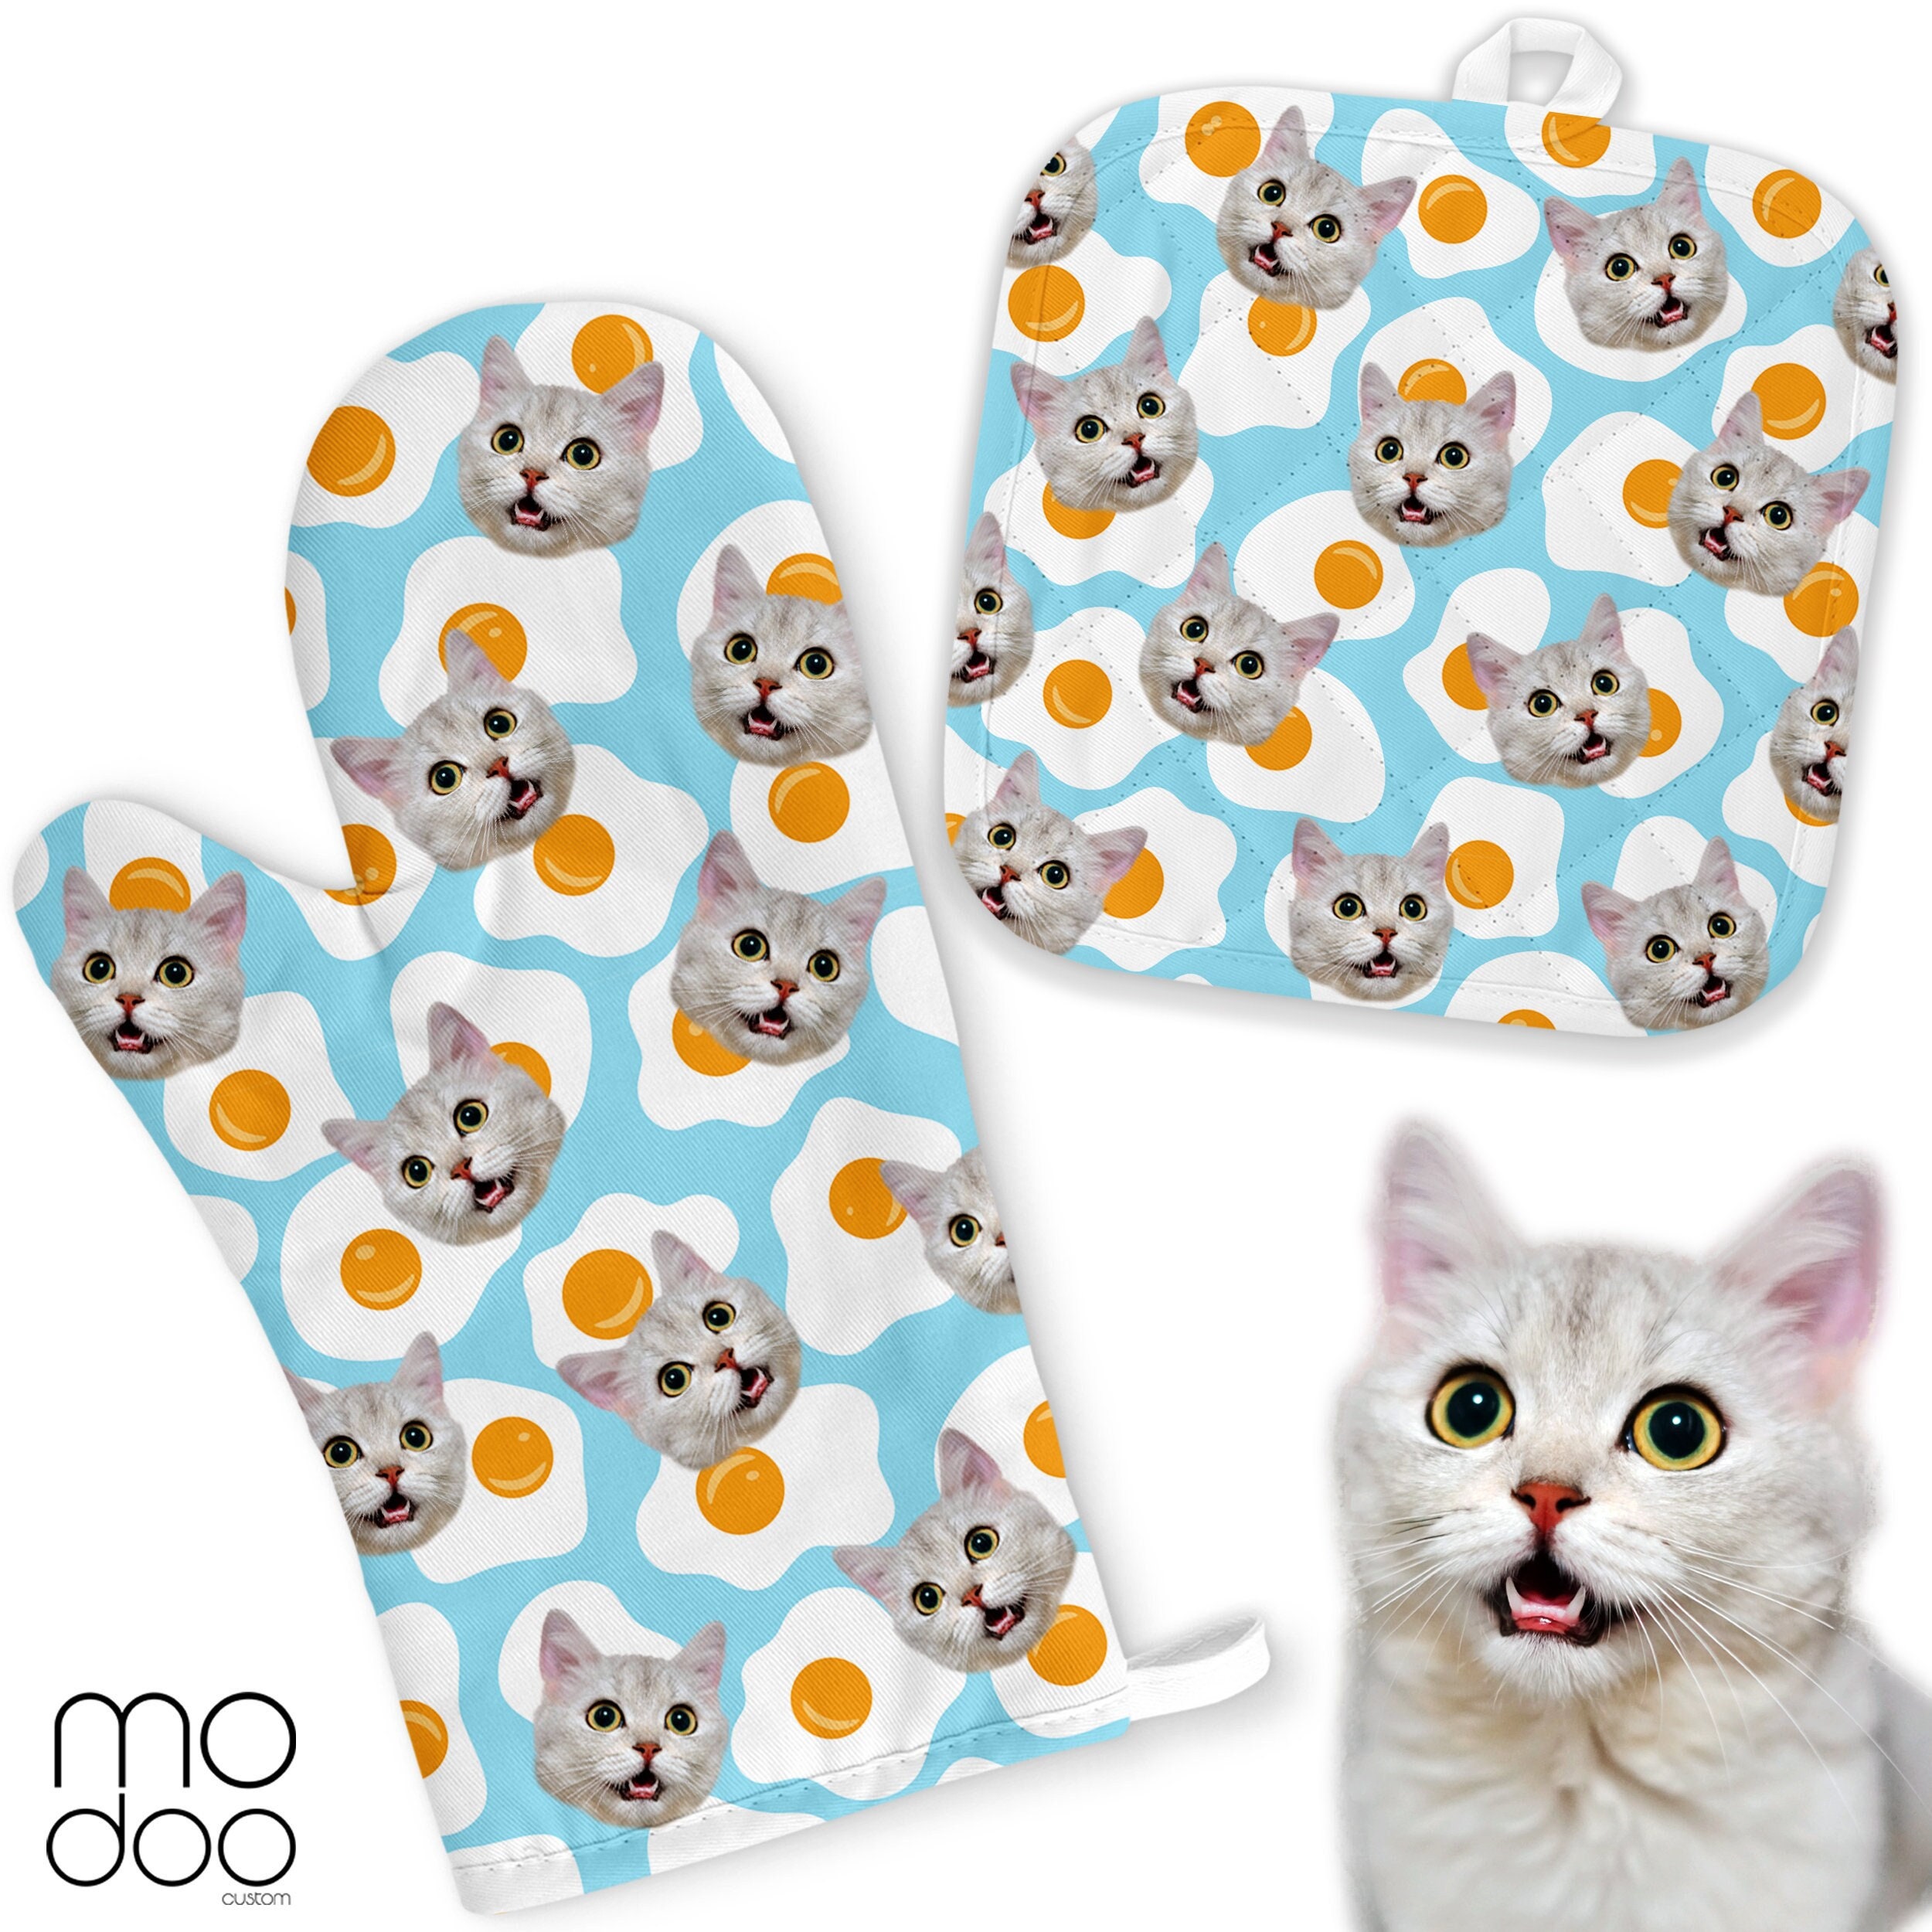 Peeking Dog Pattern Oven Mitts, Personalized Oven Mitt, Funny Gifts, G -  PersonalFury